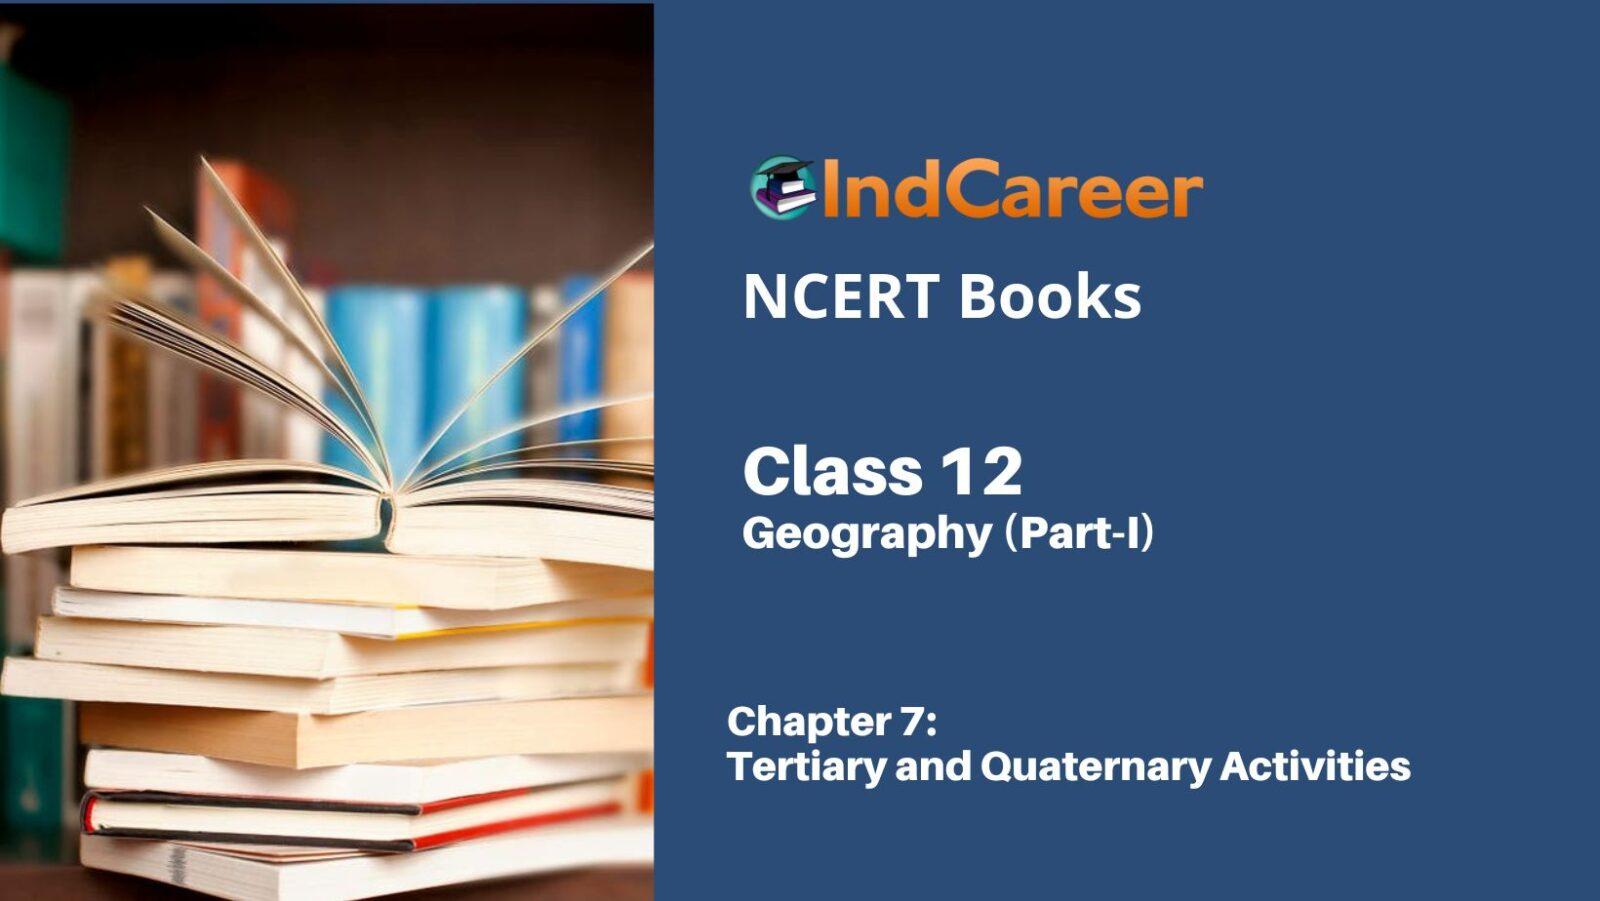 Ncert Book For Class 12 Geography Part 1 Chapter 7 Tertiary And Quaternary Activities 